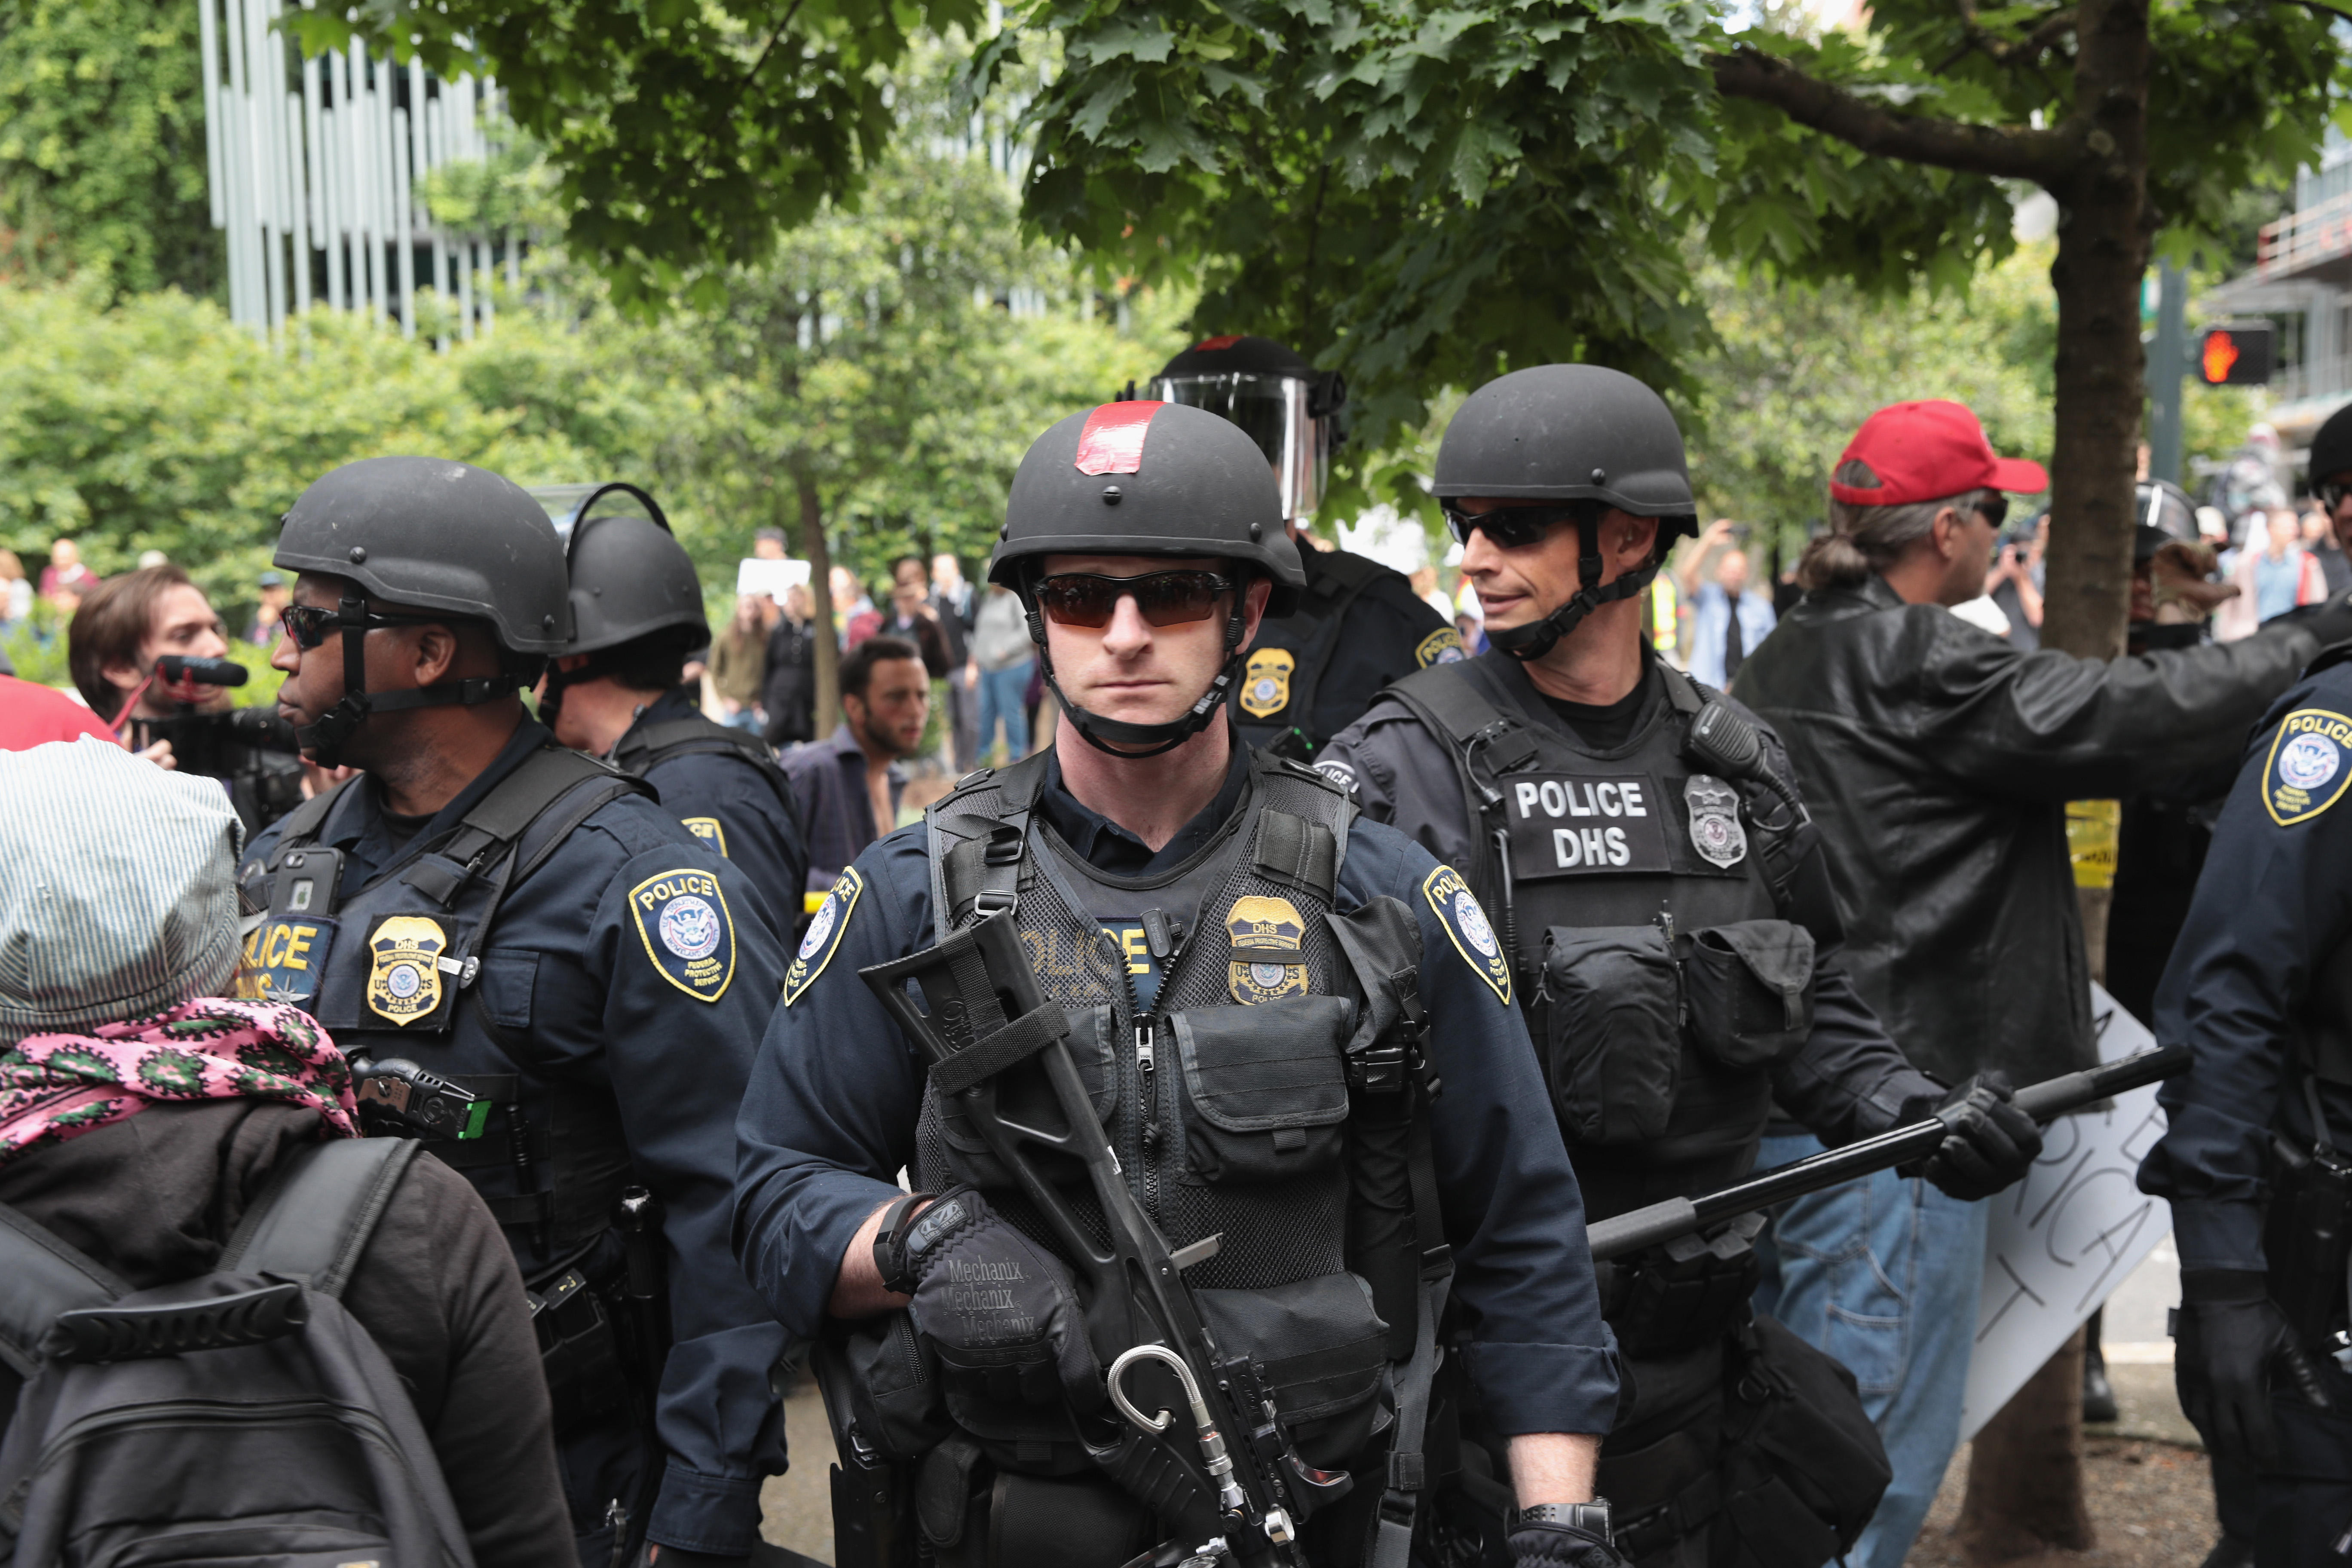 Portland protest Arrests made as thousands gather for opposing rallies